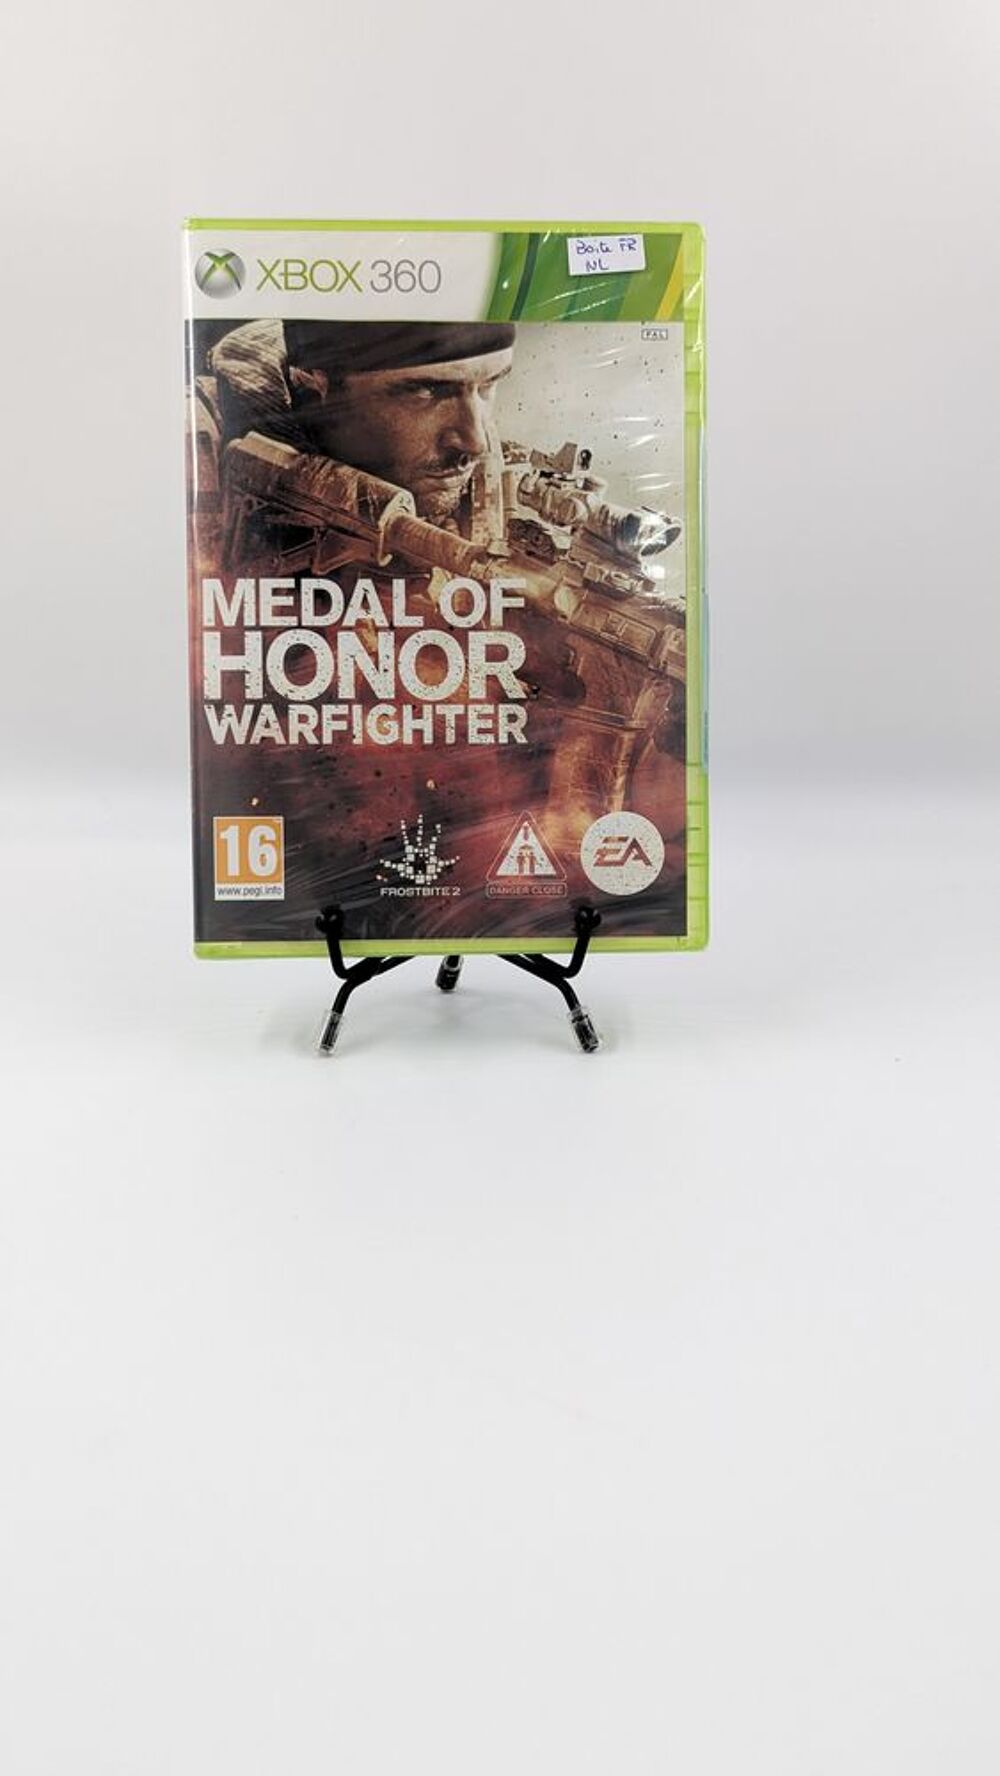 Jeu Xbox 360 Medal of Honor Warfighter neuf sous blister Consoles et jeux vidos